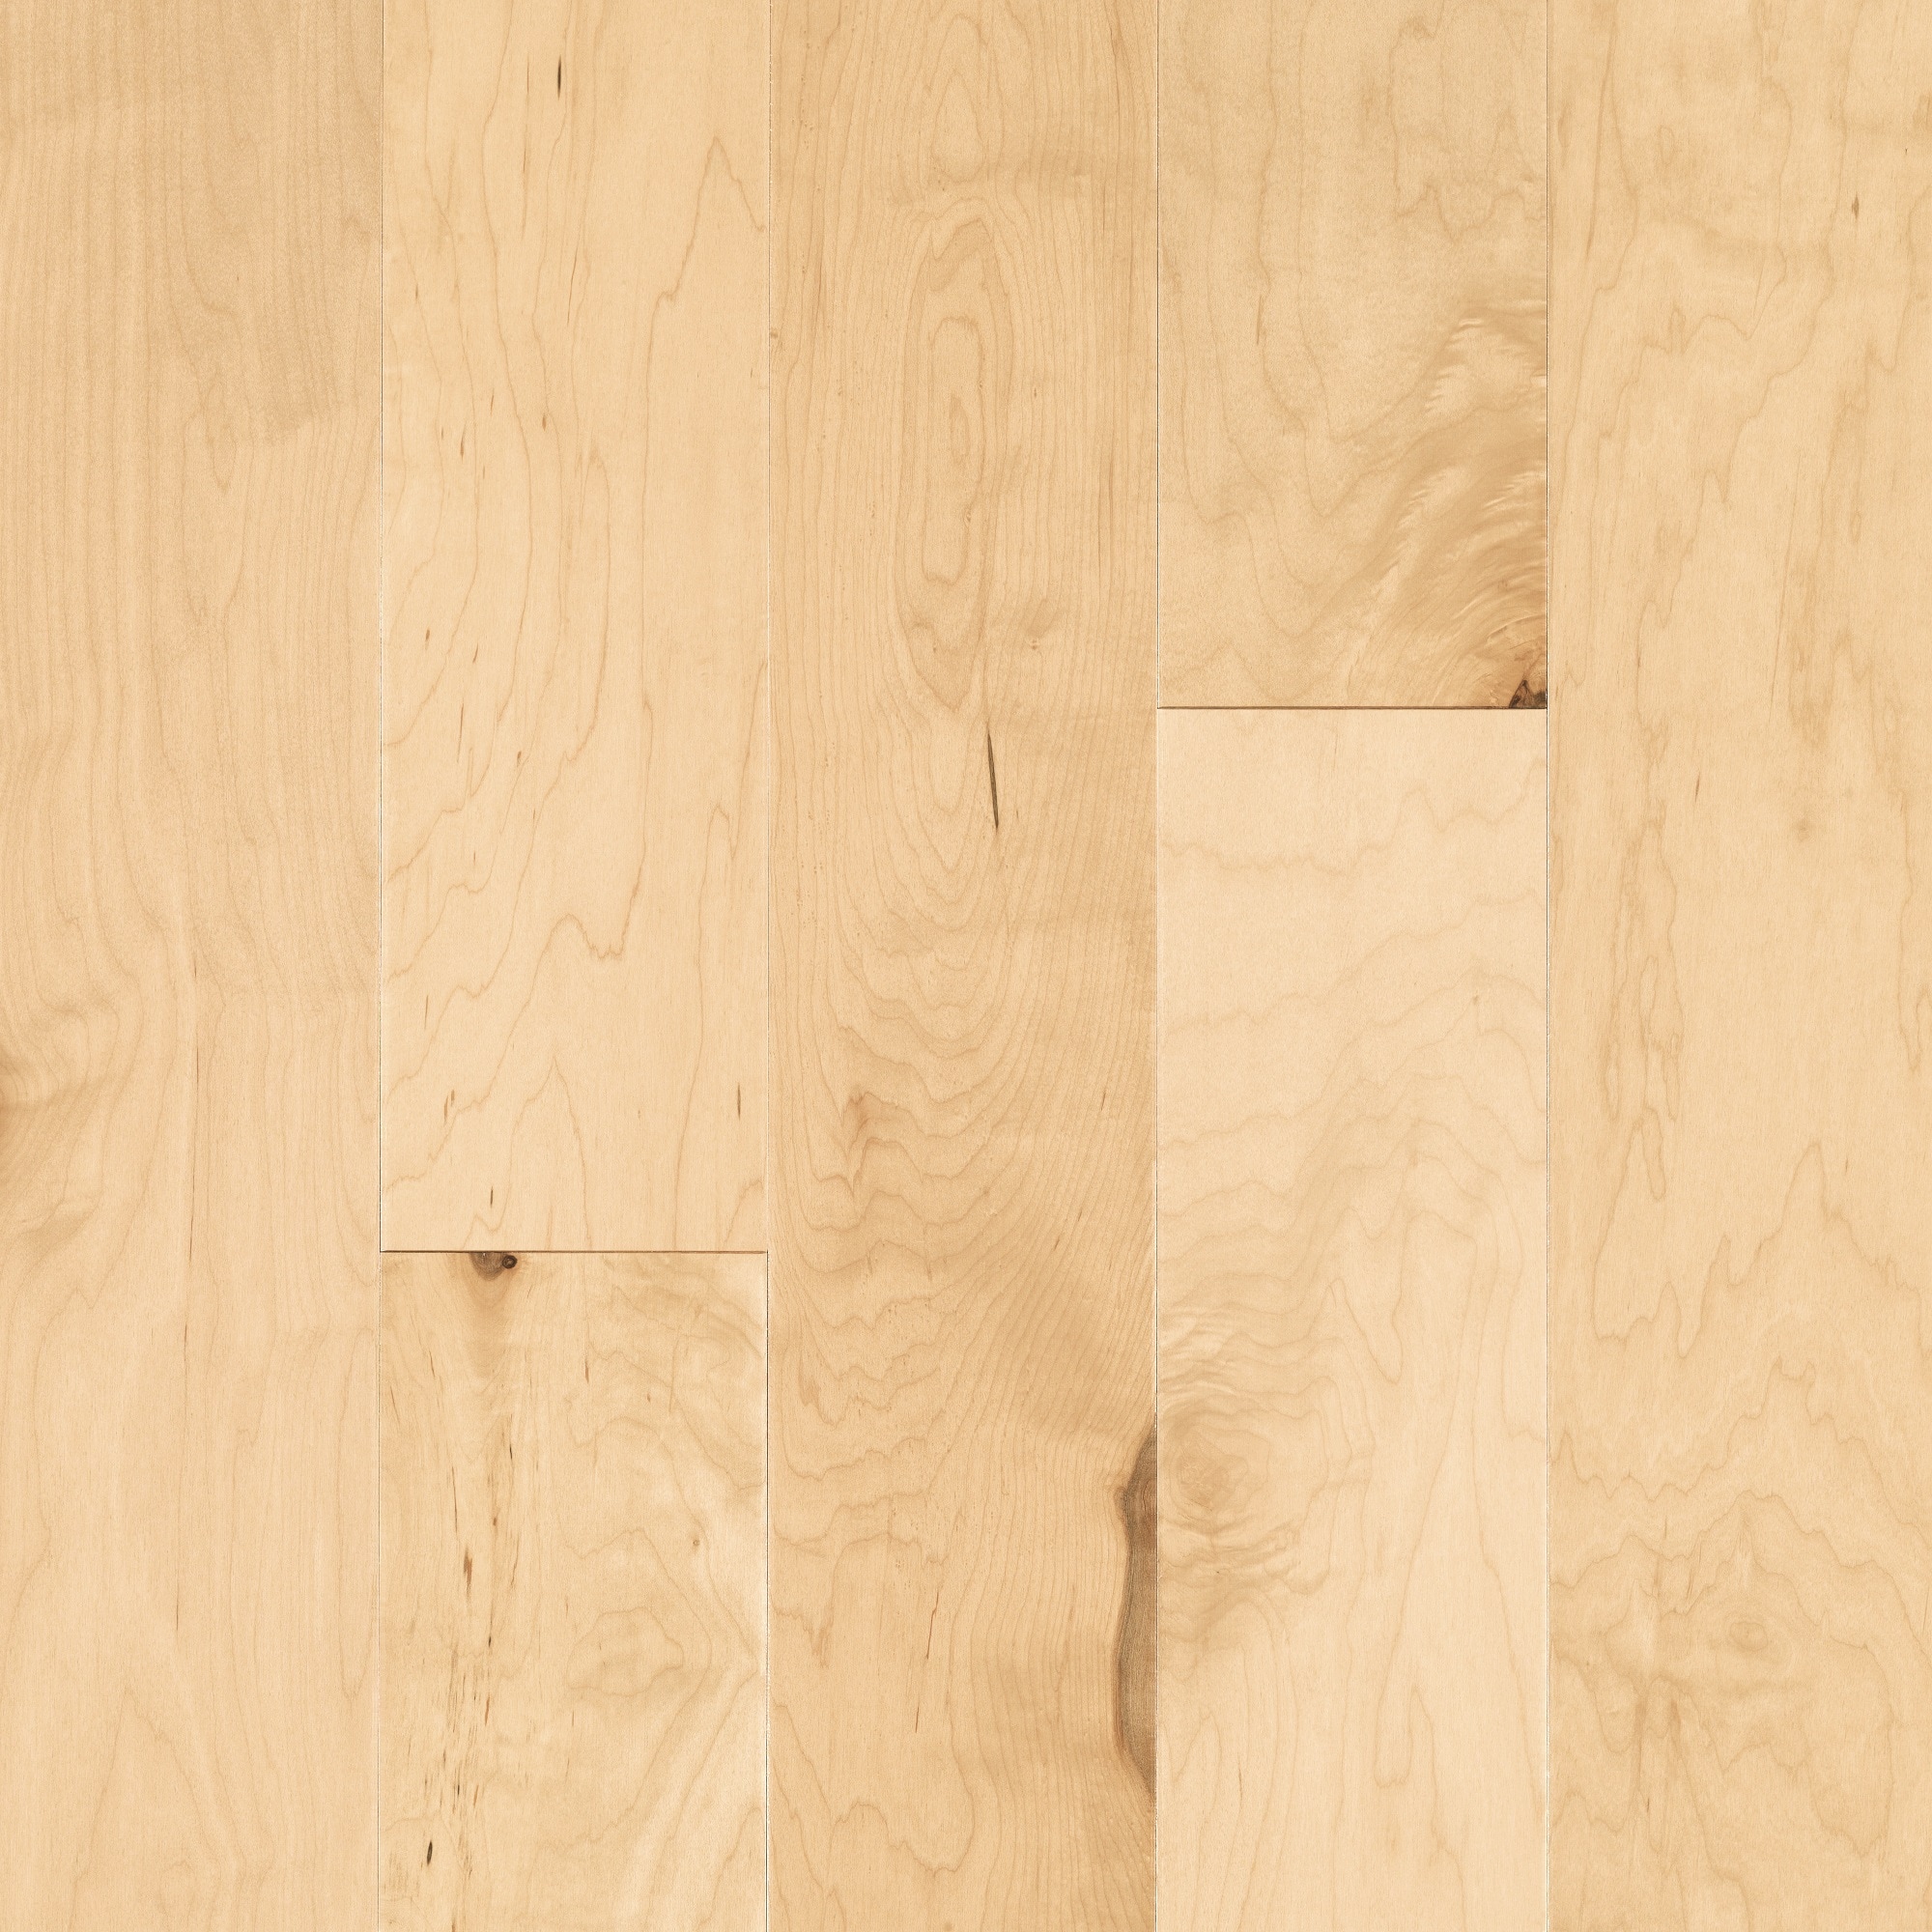 Pergo Max Natural Maple 5 1 4 In Wide X, 5 8 Inch Thick Engineered Hardwood Flooring